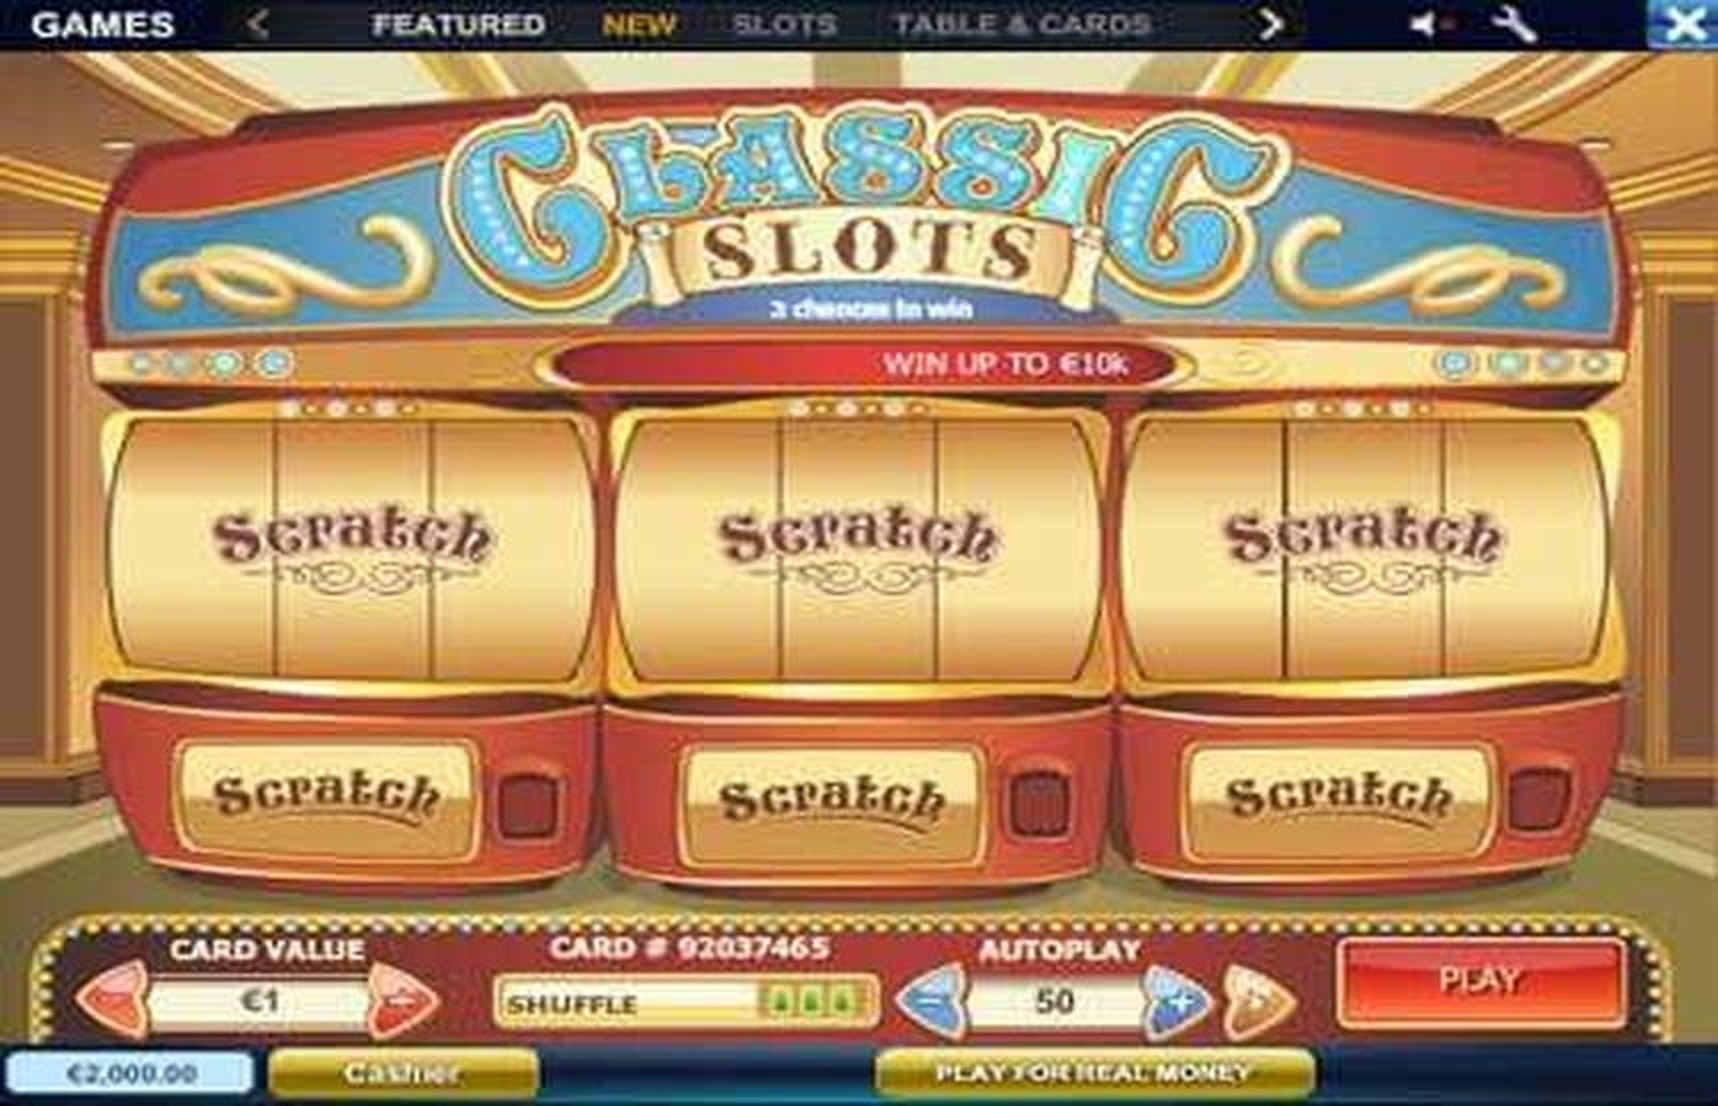 The Classic Slot Scratch Online Slot Demo Game by Playtech